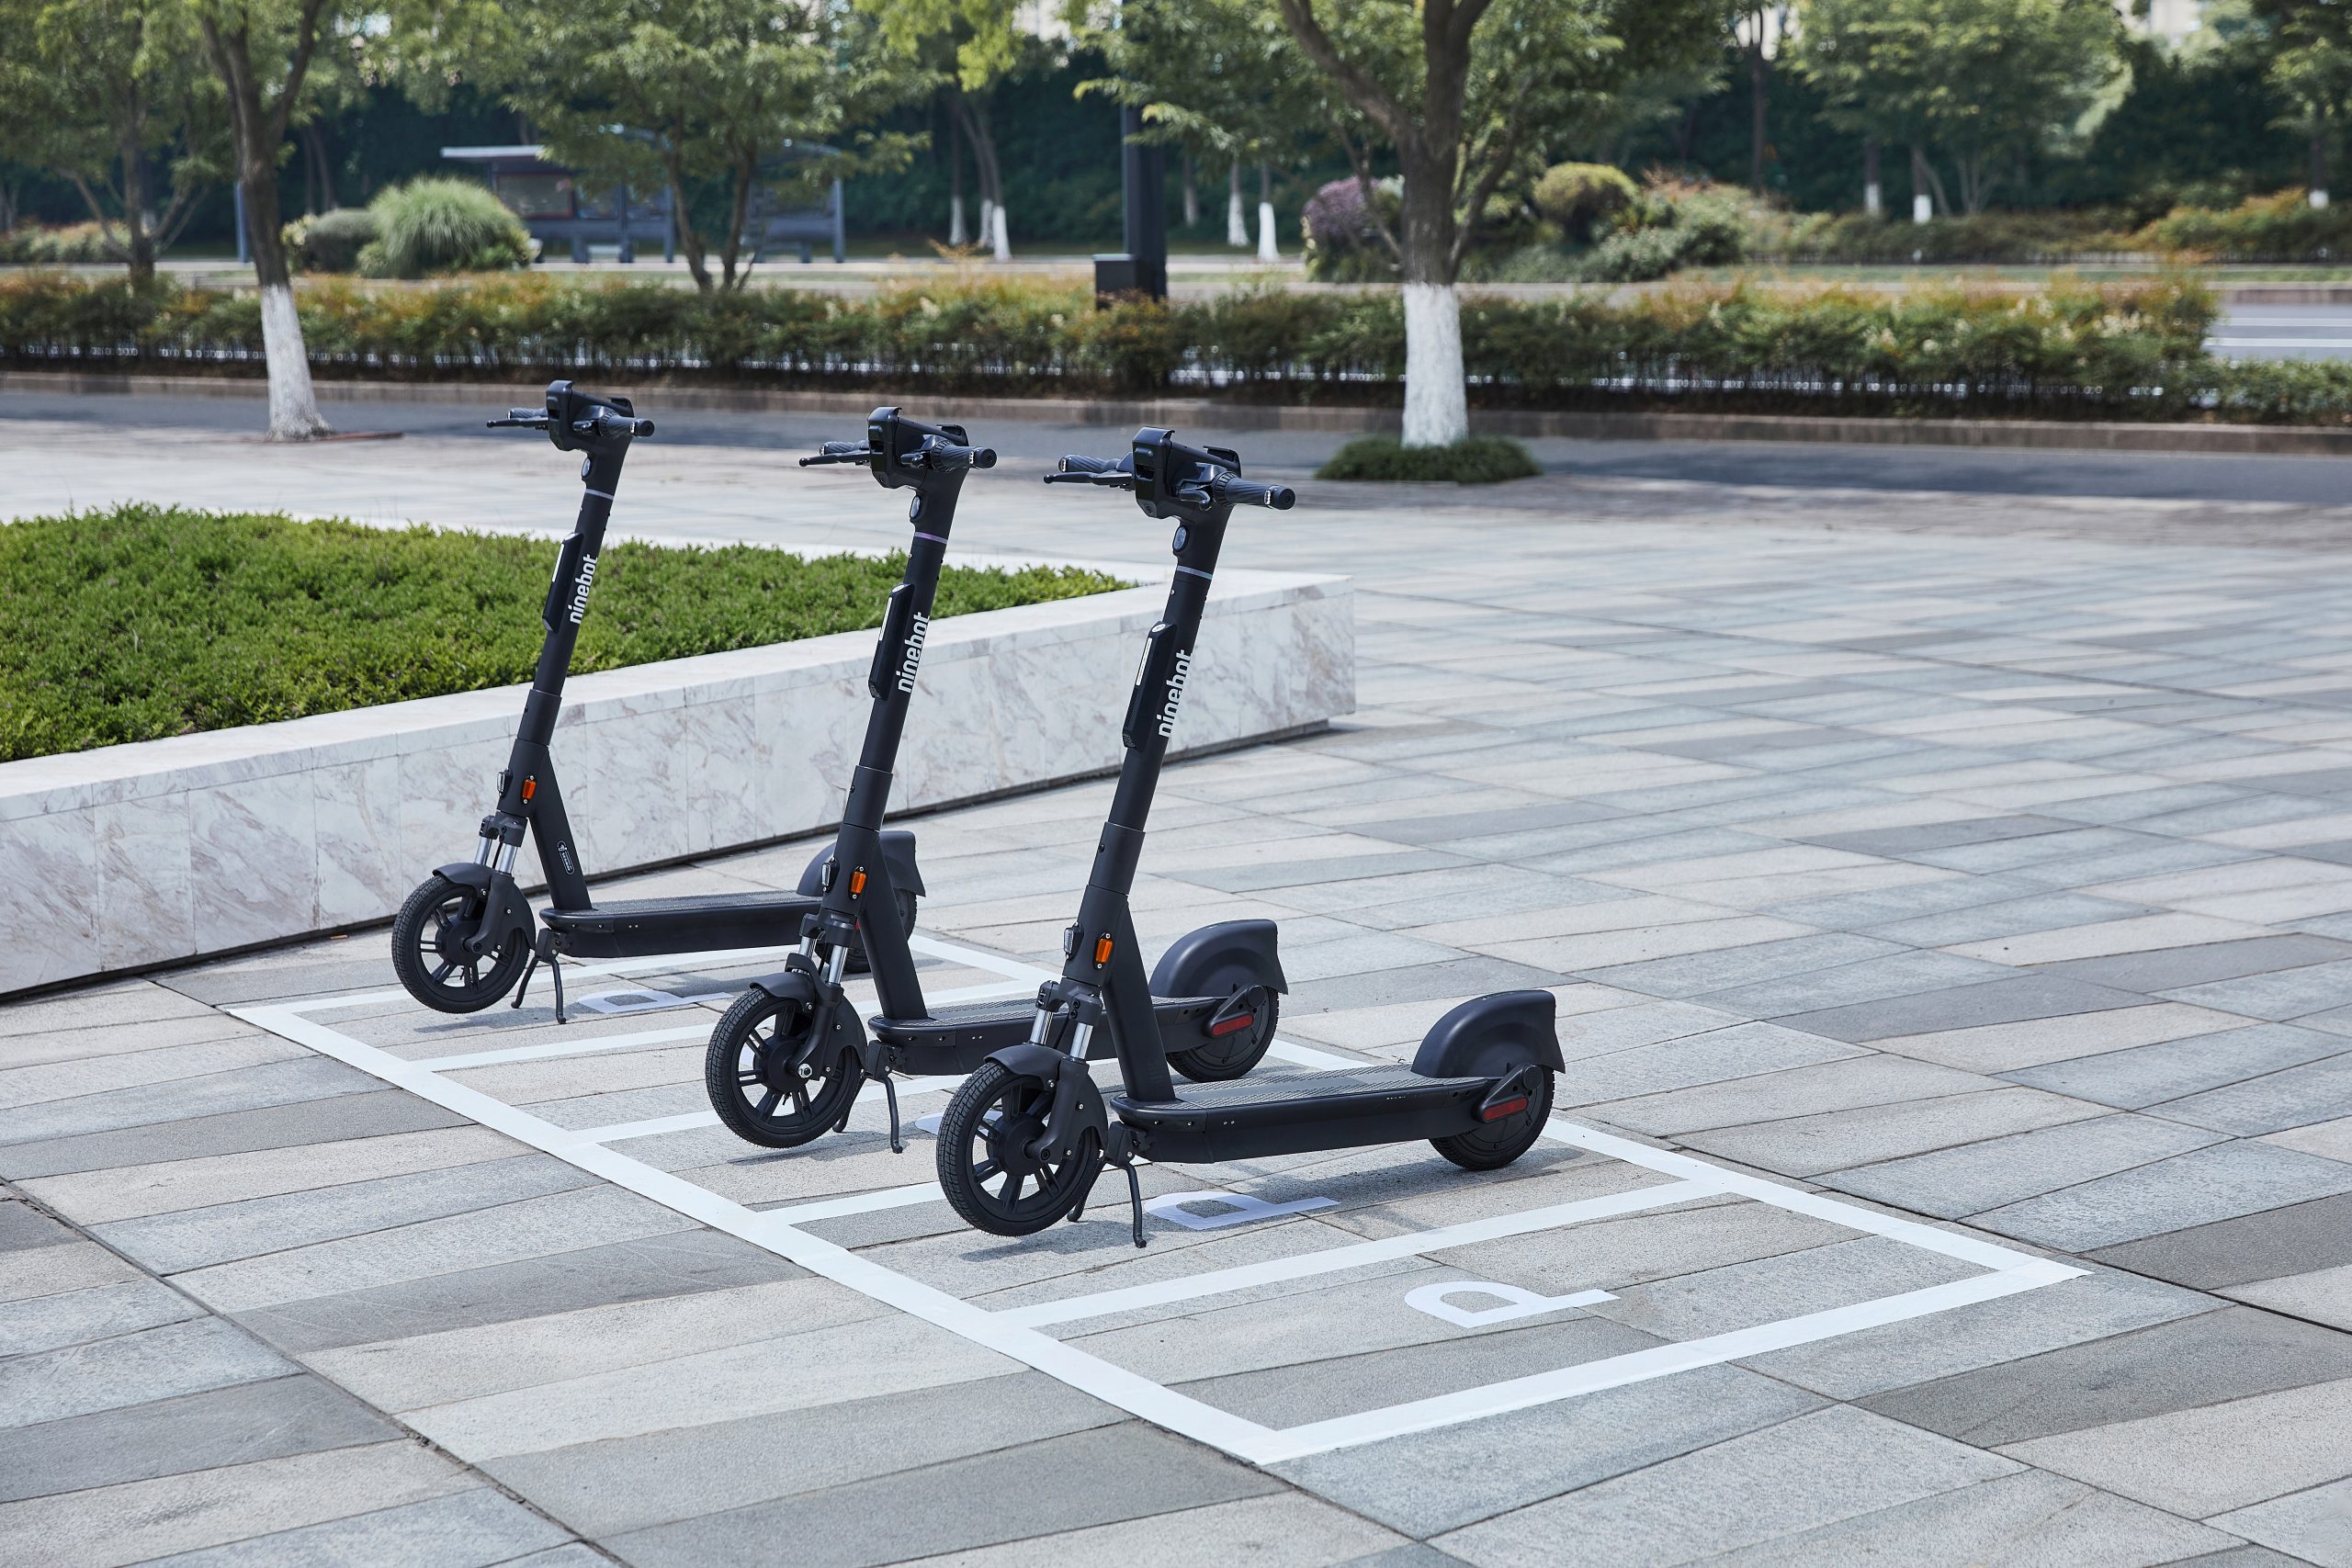 Drover AI deploys computer vision tech on Segway vehicles